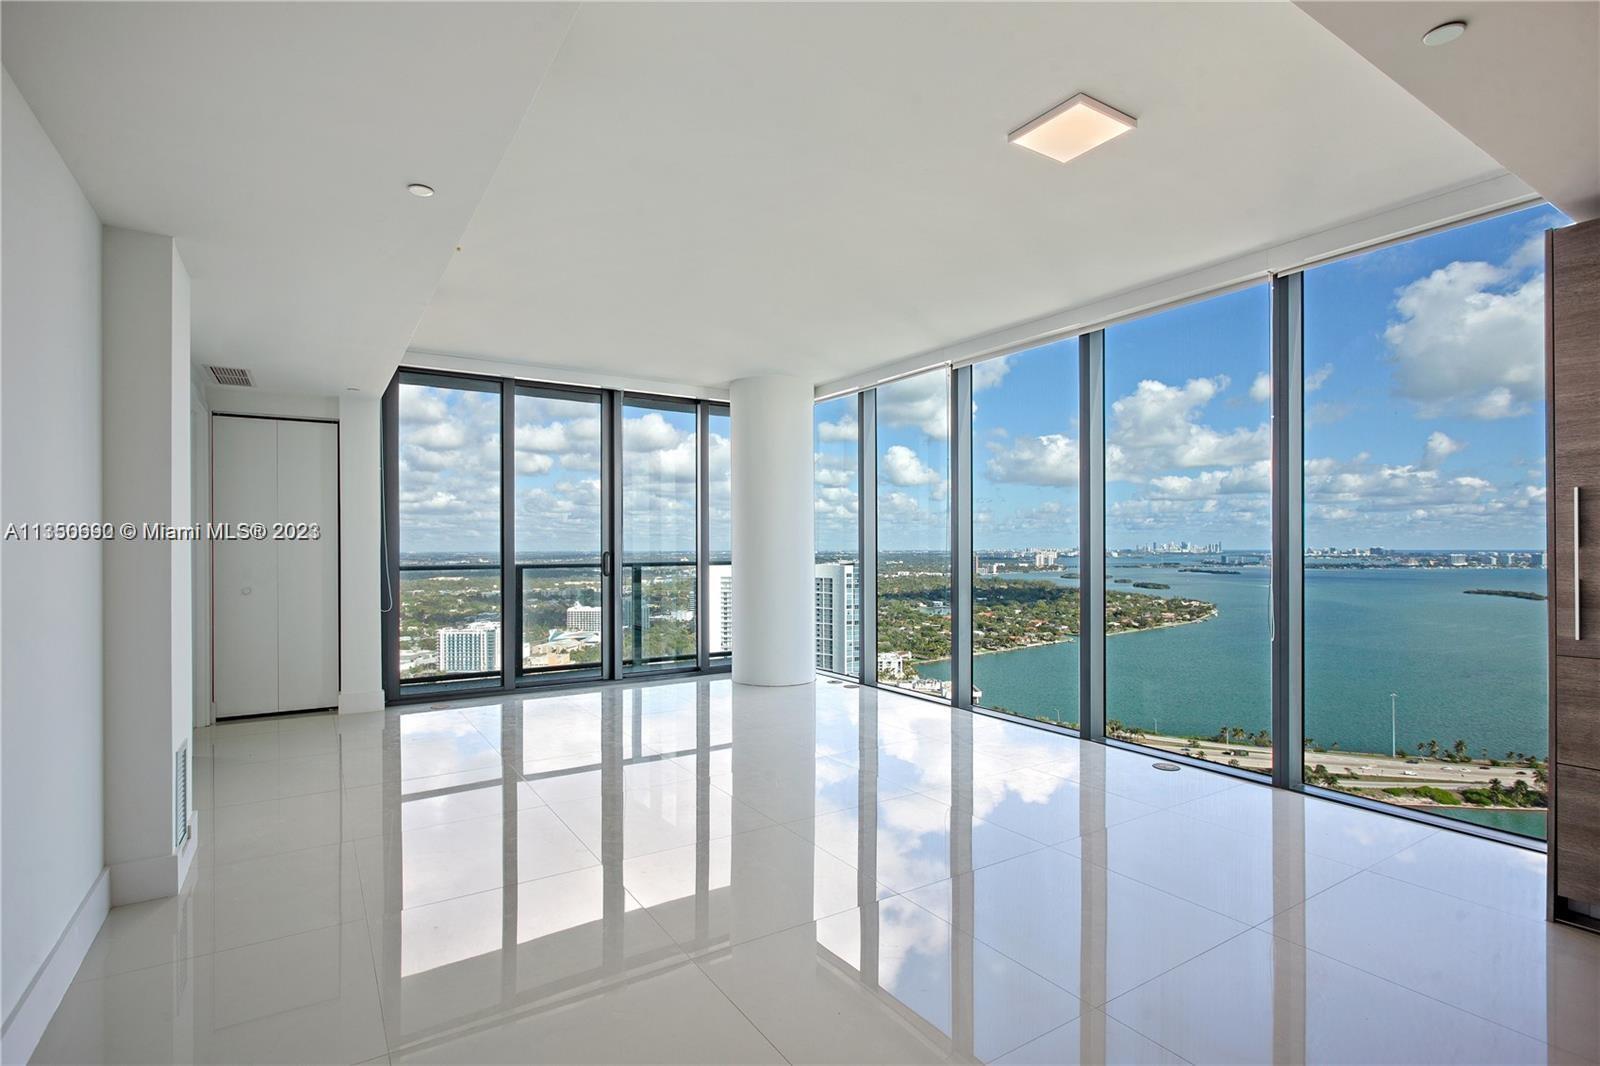 PARAISO BAY IN EDGEWATER OVERSIZED SF 706-1 BR + 1 1/2 BA spectacular Ocean view * LARGE LIVING AREA